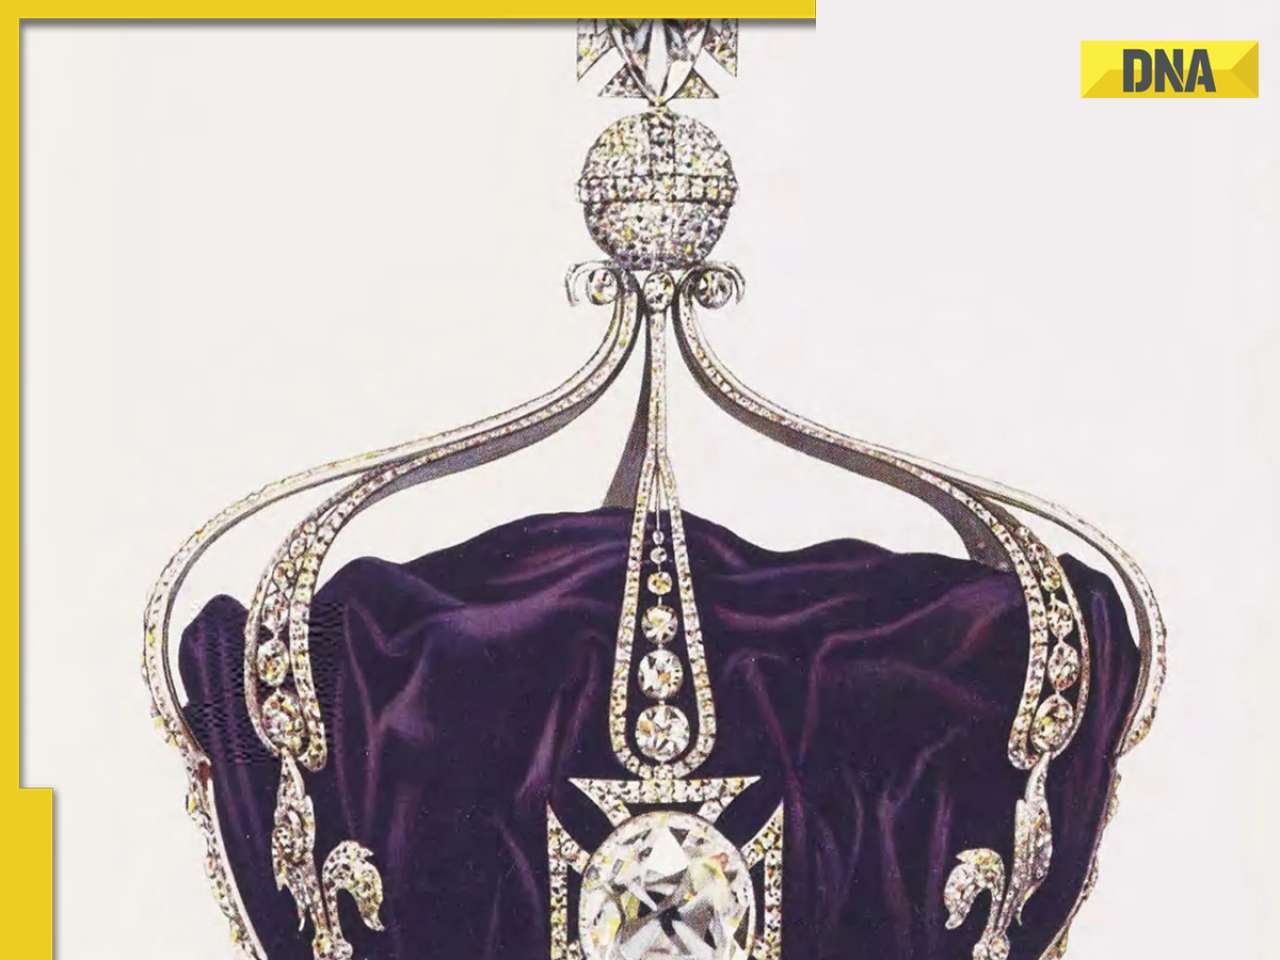 Meet real owner of Koh-i-Noor diamond before it went to Mughals and then to British